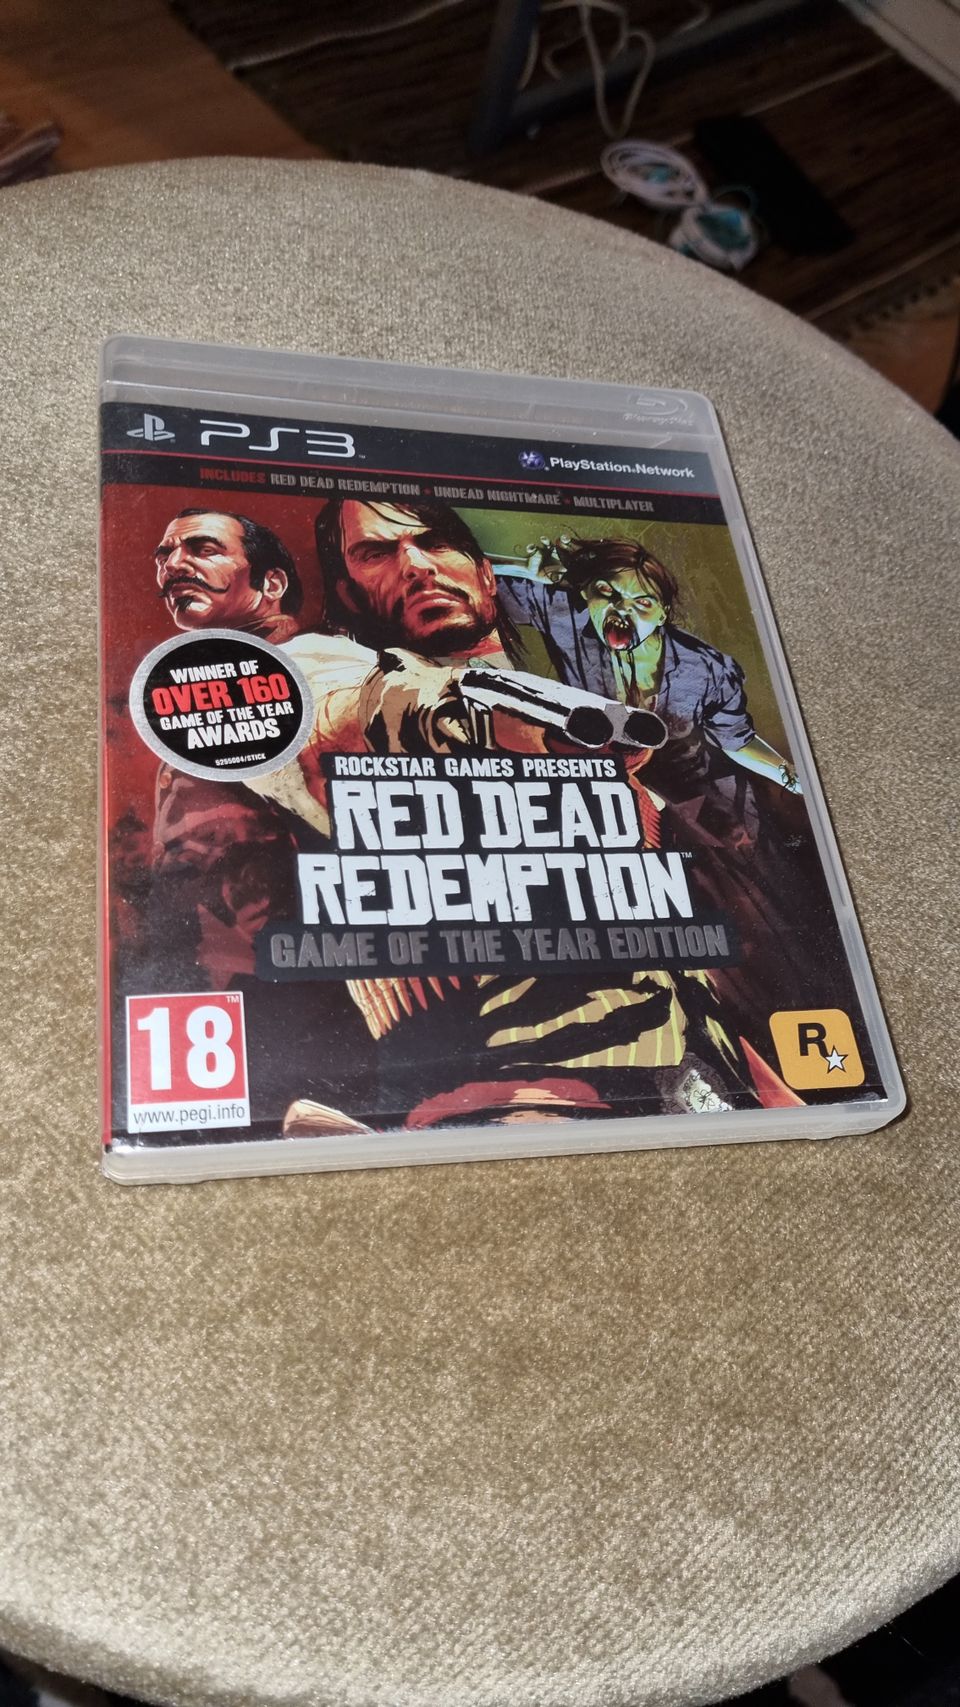 PS3/Playstation 3: Red Dead Redemption "Game of the year edition"